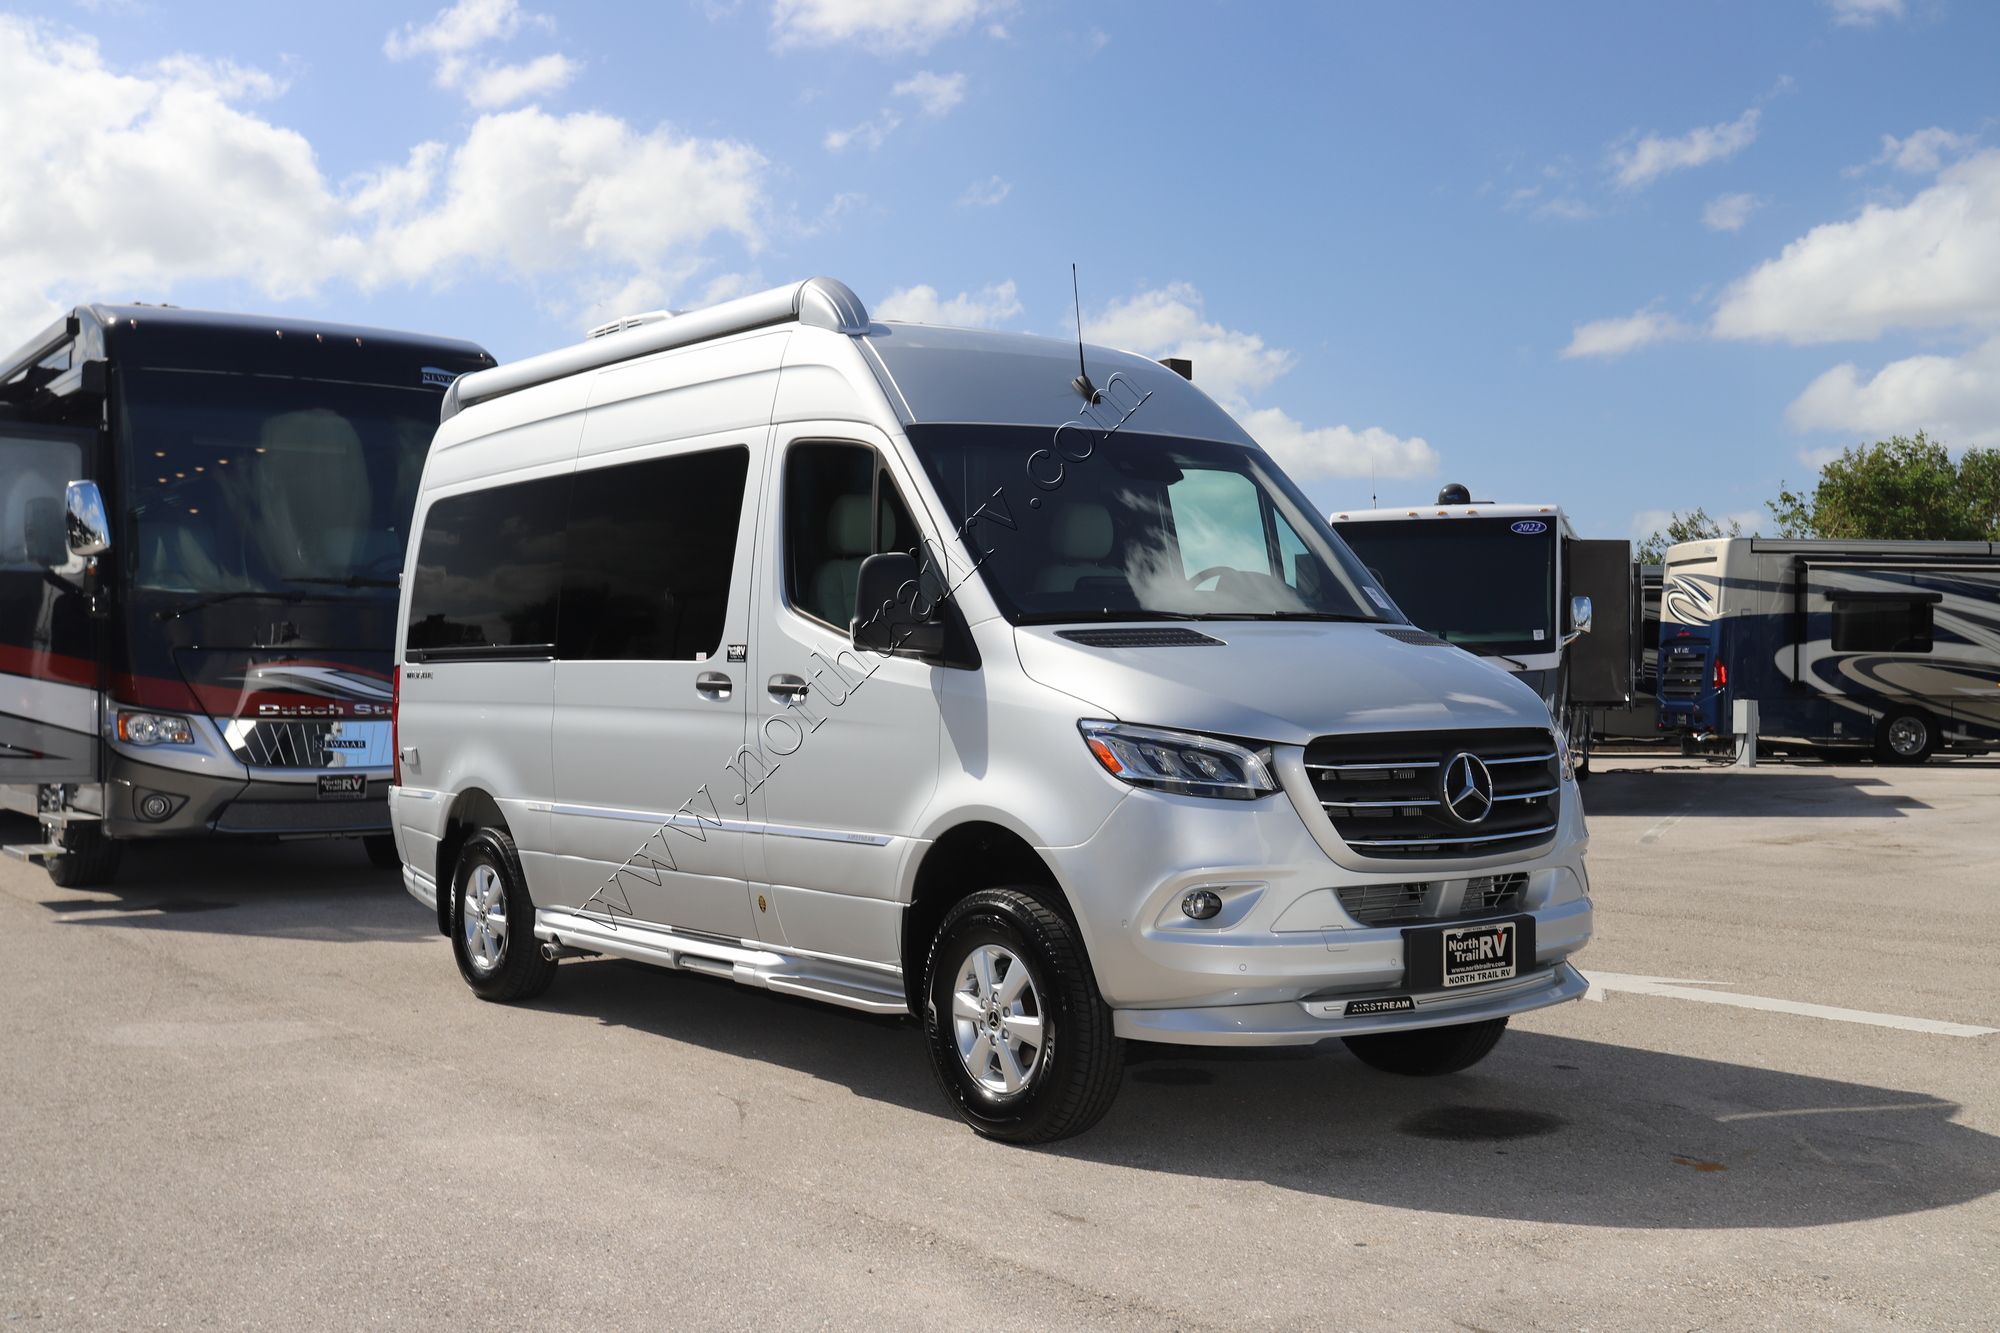 New 2023 Airstream Interstate 19 Class B  For Sale